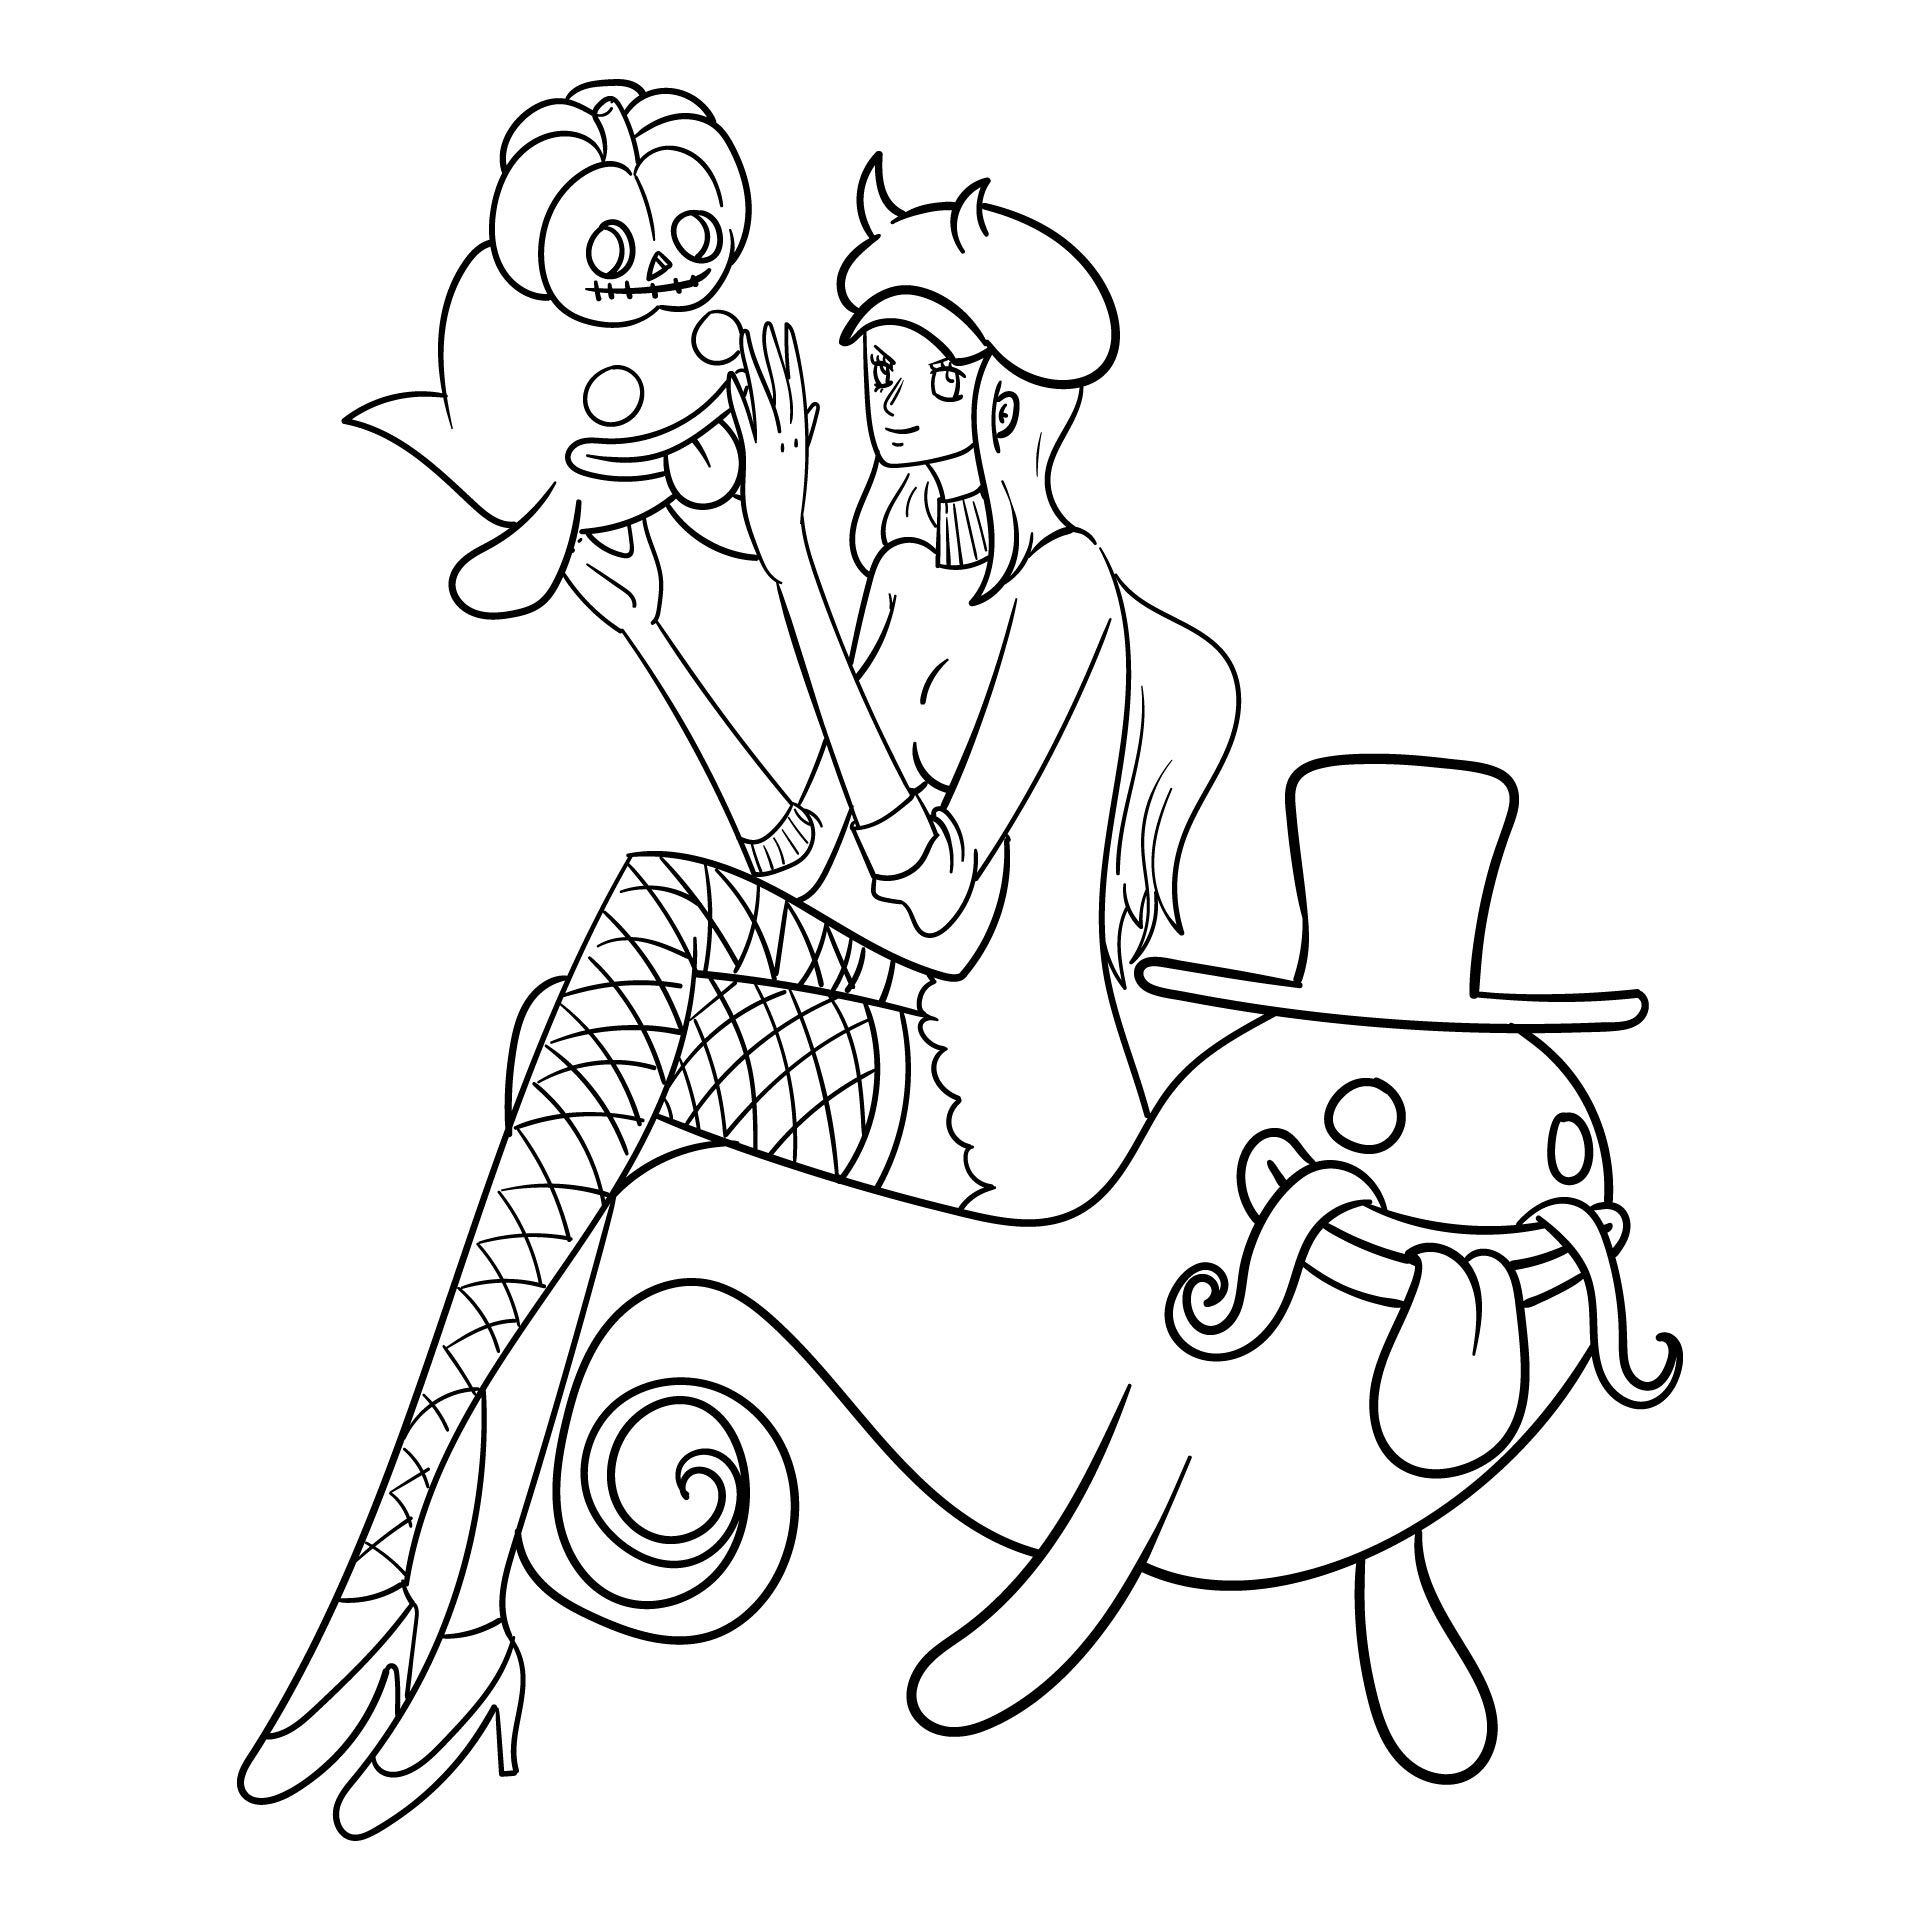 Halloween Coloring Pages and Activities